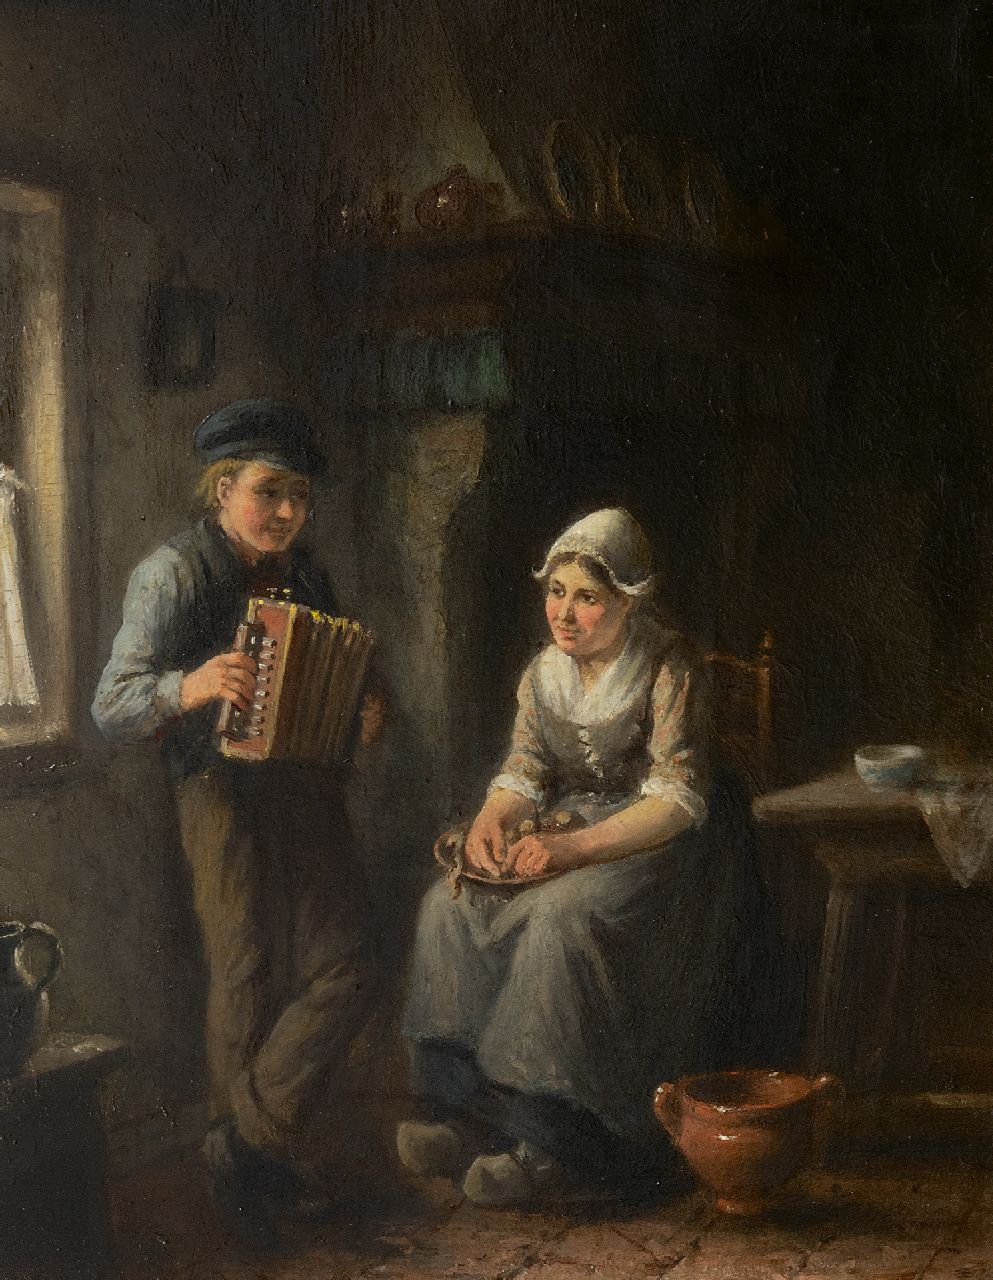 Damschreuder J.J.M.  | Jan Jacobus Matthijs Damschreuder | Paintings offered for sale | The young accordion player, oil on canvas 47.4 x 37.2 cm, signed l.l.